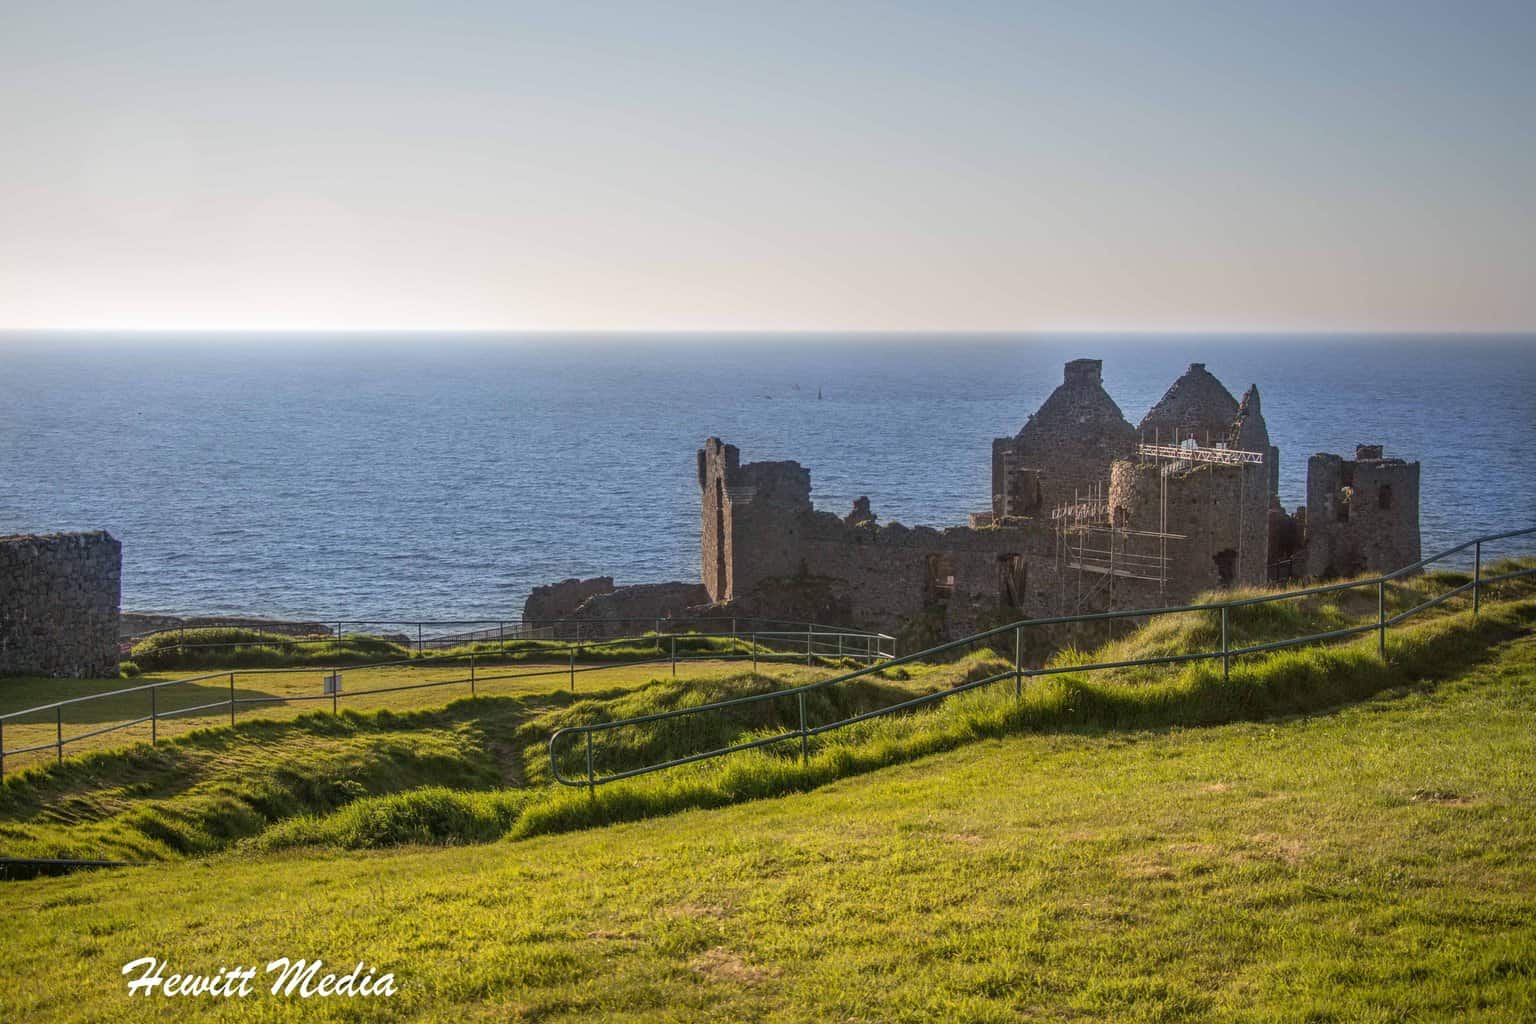 The Dunluce Castle in Northern Ireland